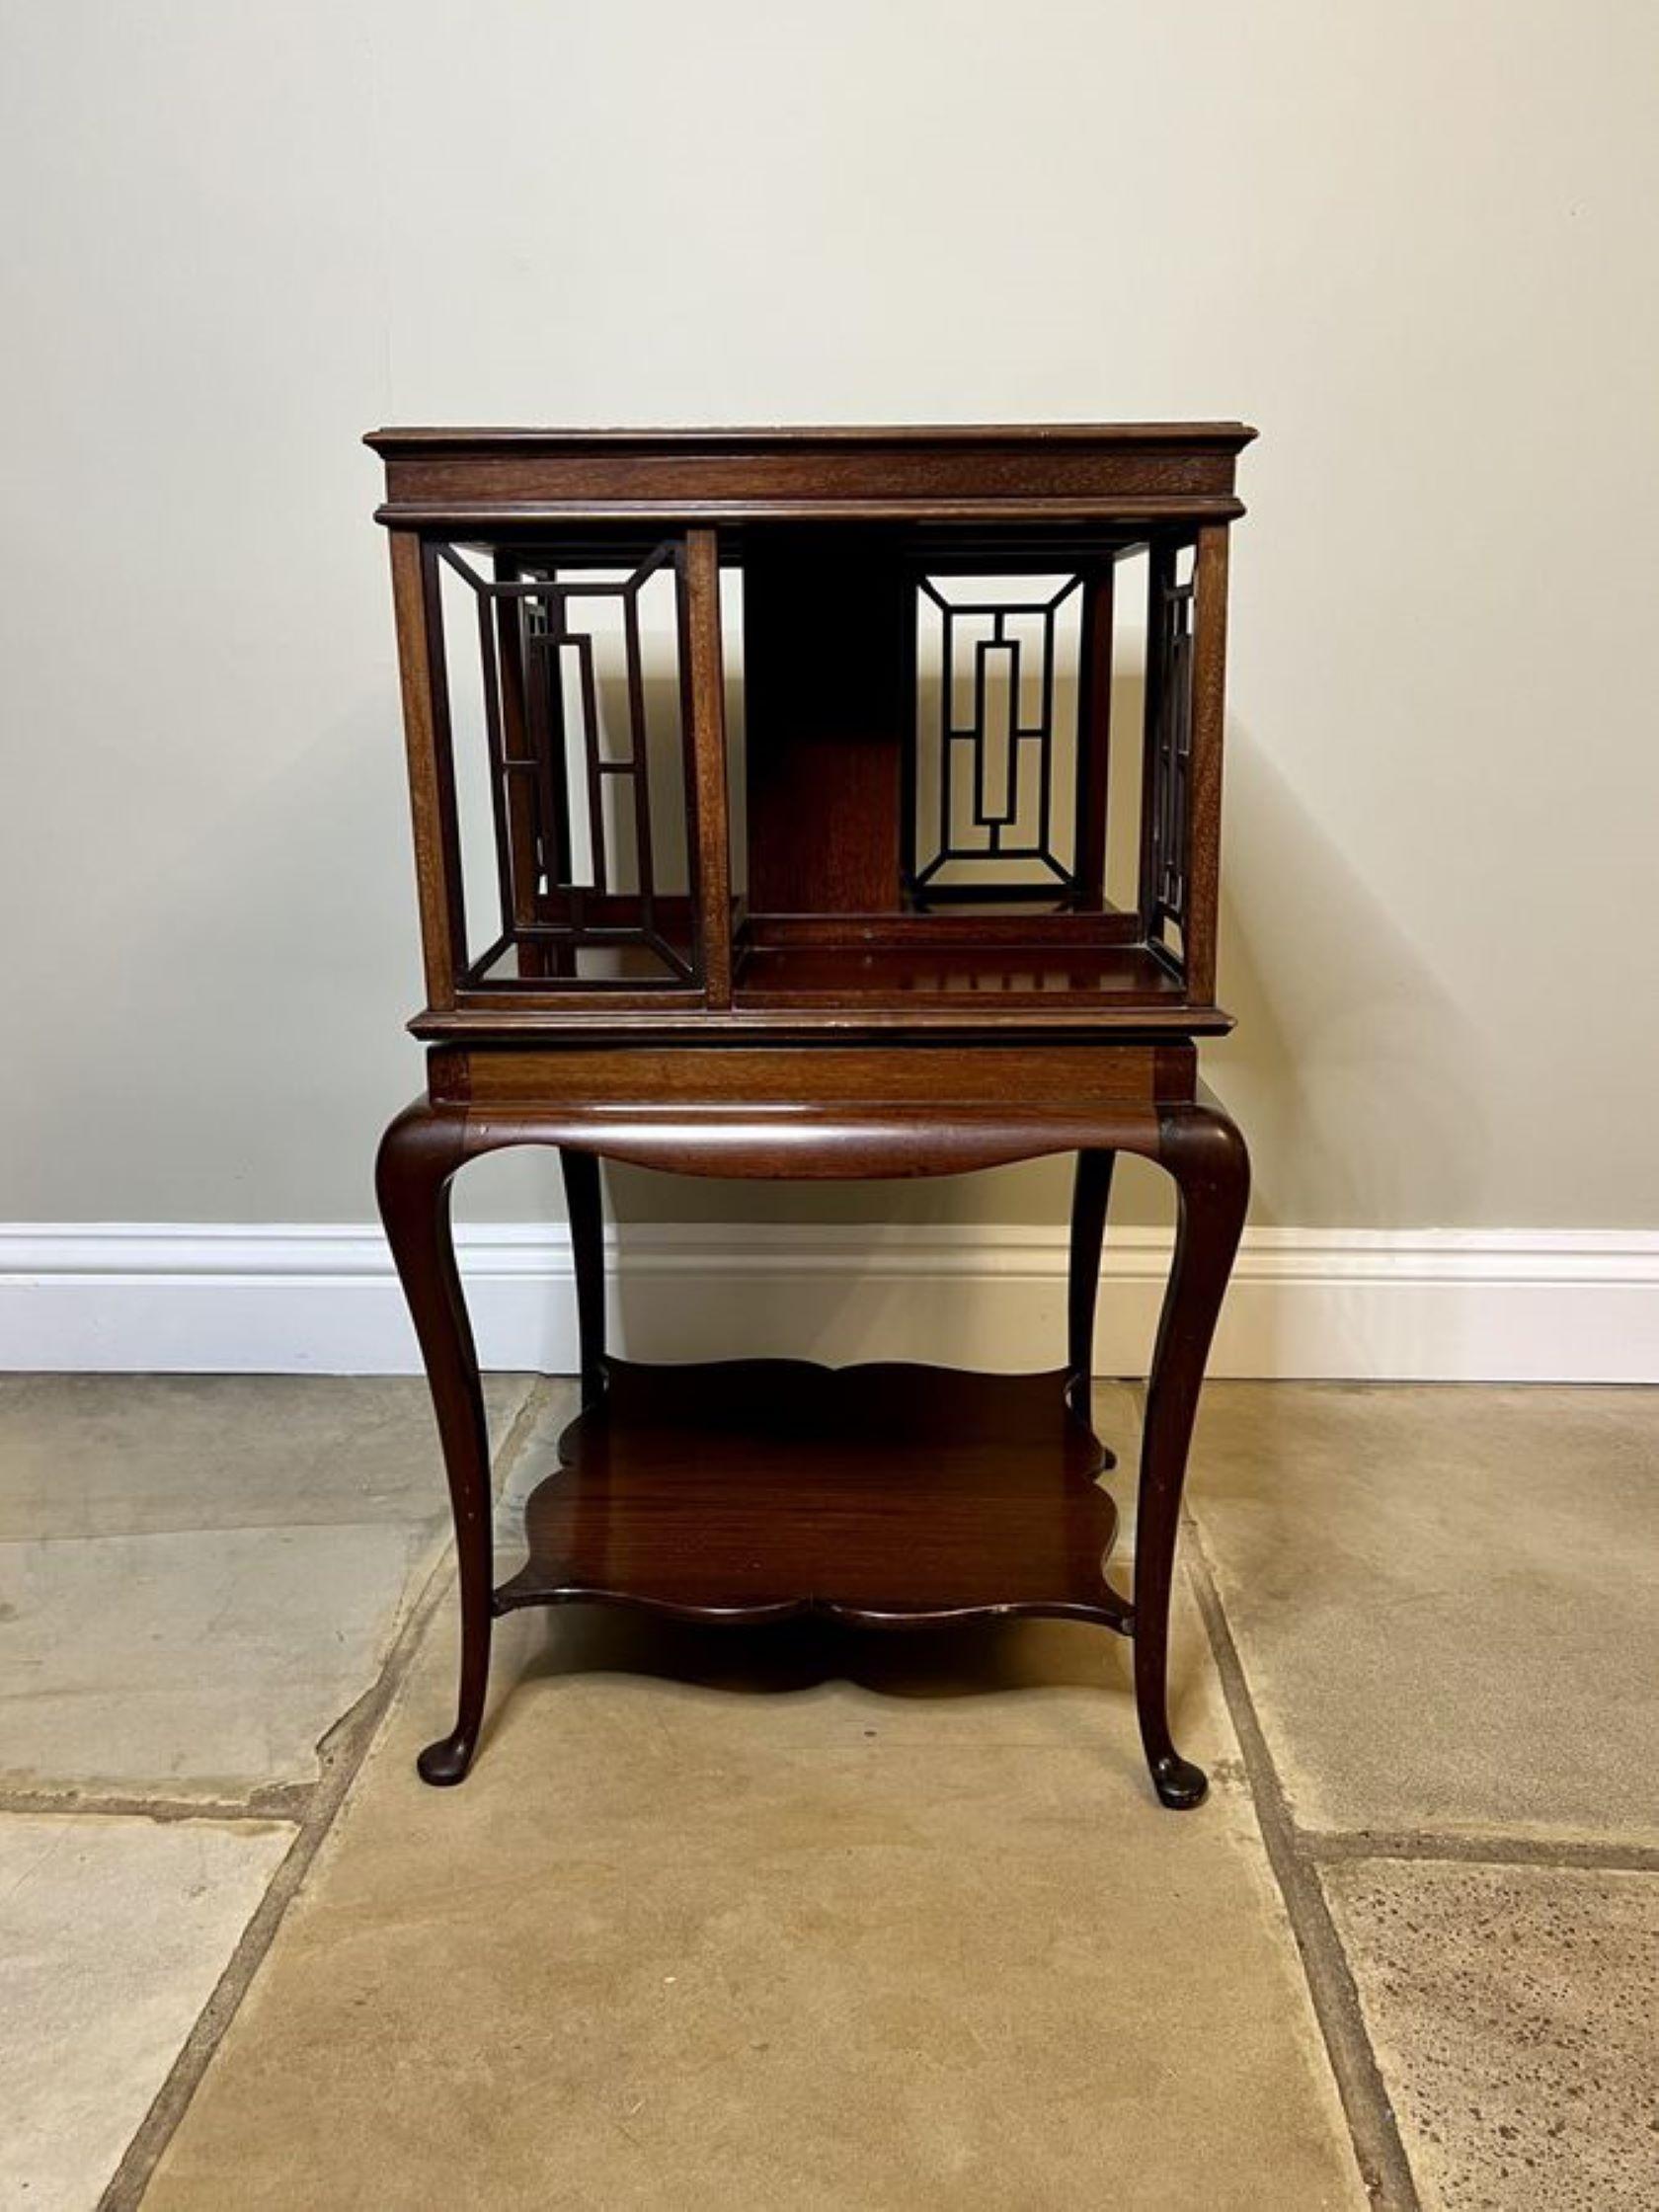 Fantastic antique Edwardian mahogany revolving bookcase, having a quality mahogany top with a moulded edge above four carved fretwork supports and four storage compartments, the revolving bookcase is supported by elegant shaped cabriole legs with